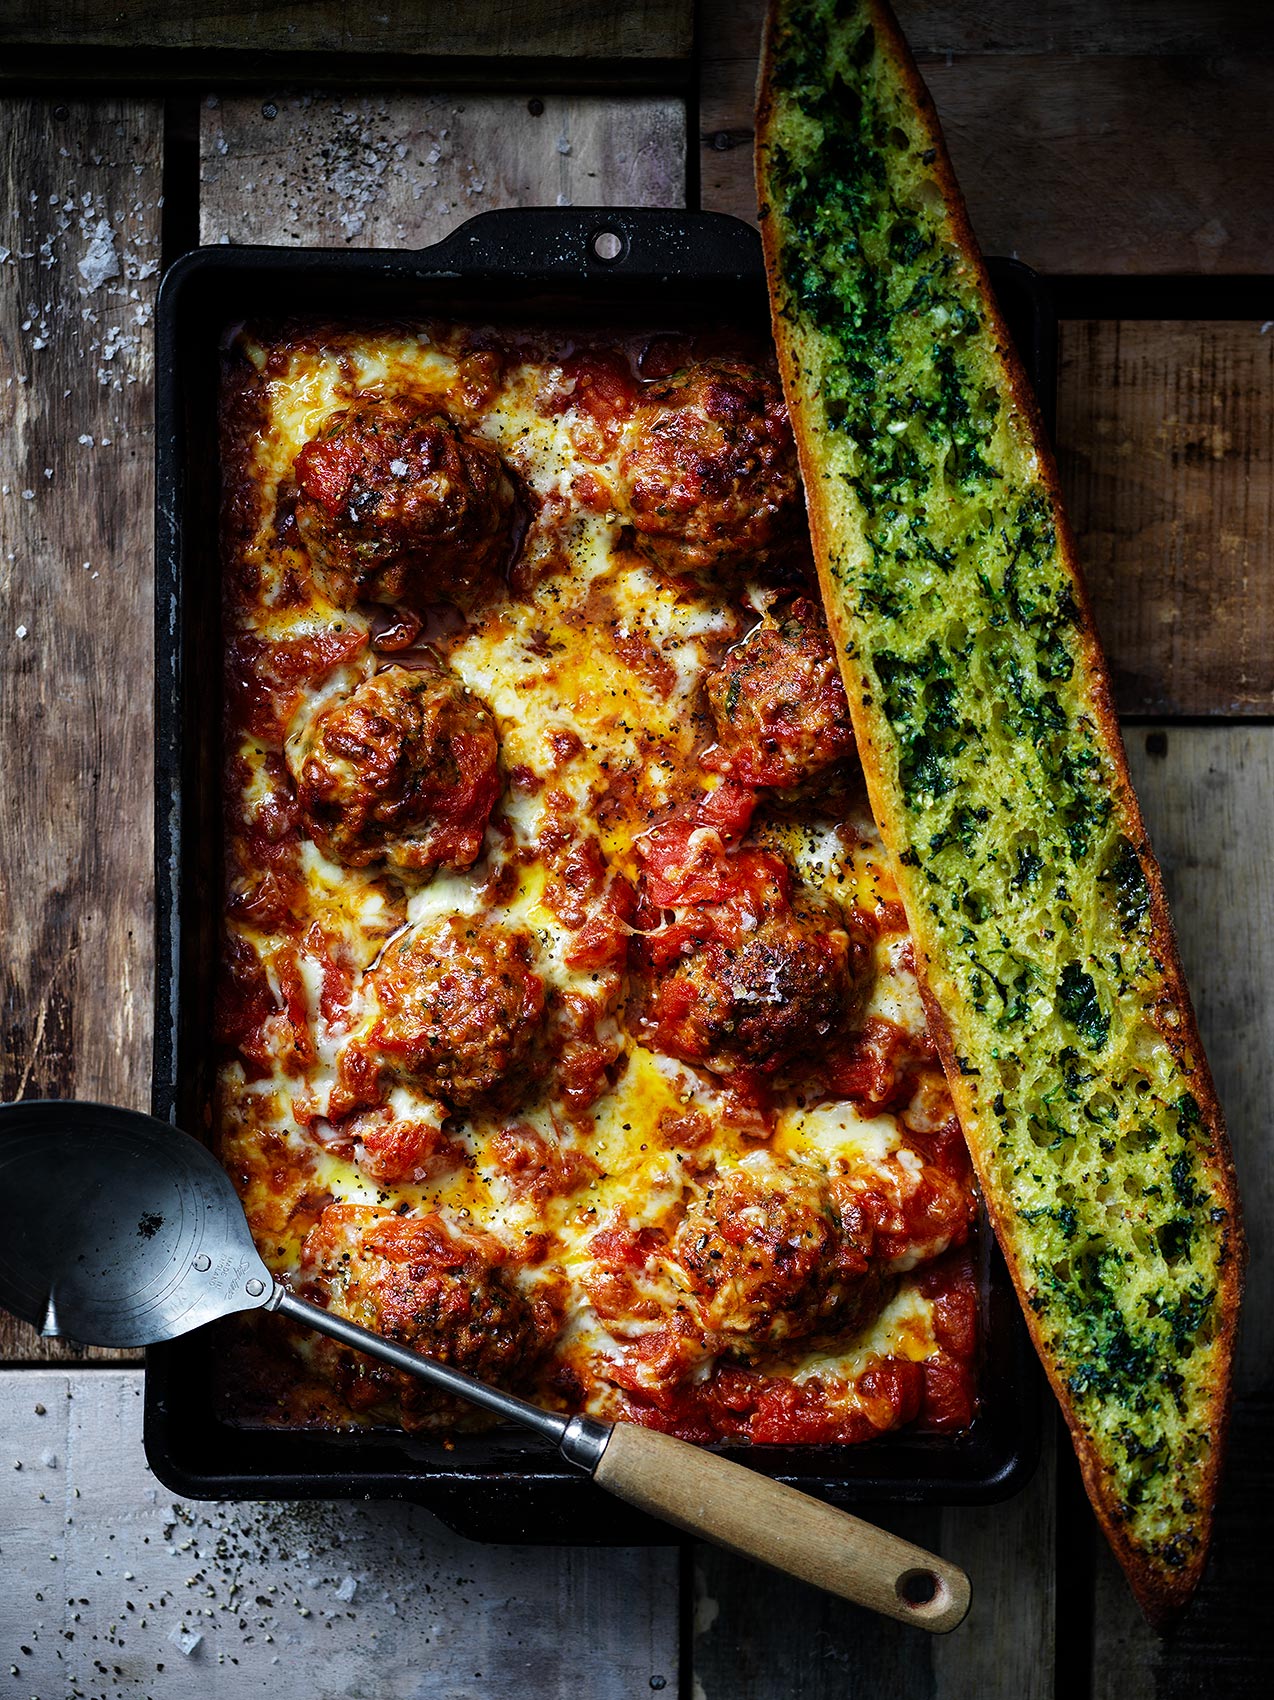 20210422Cheesy-oven-roasted-meatballs-with-tomato-ragu-and-garlic-bread